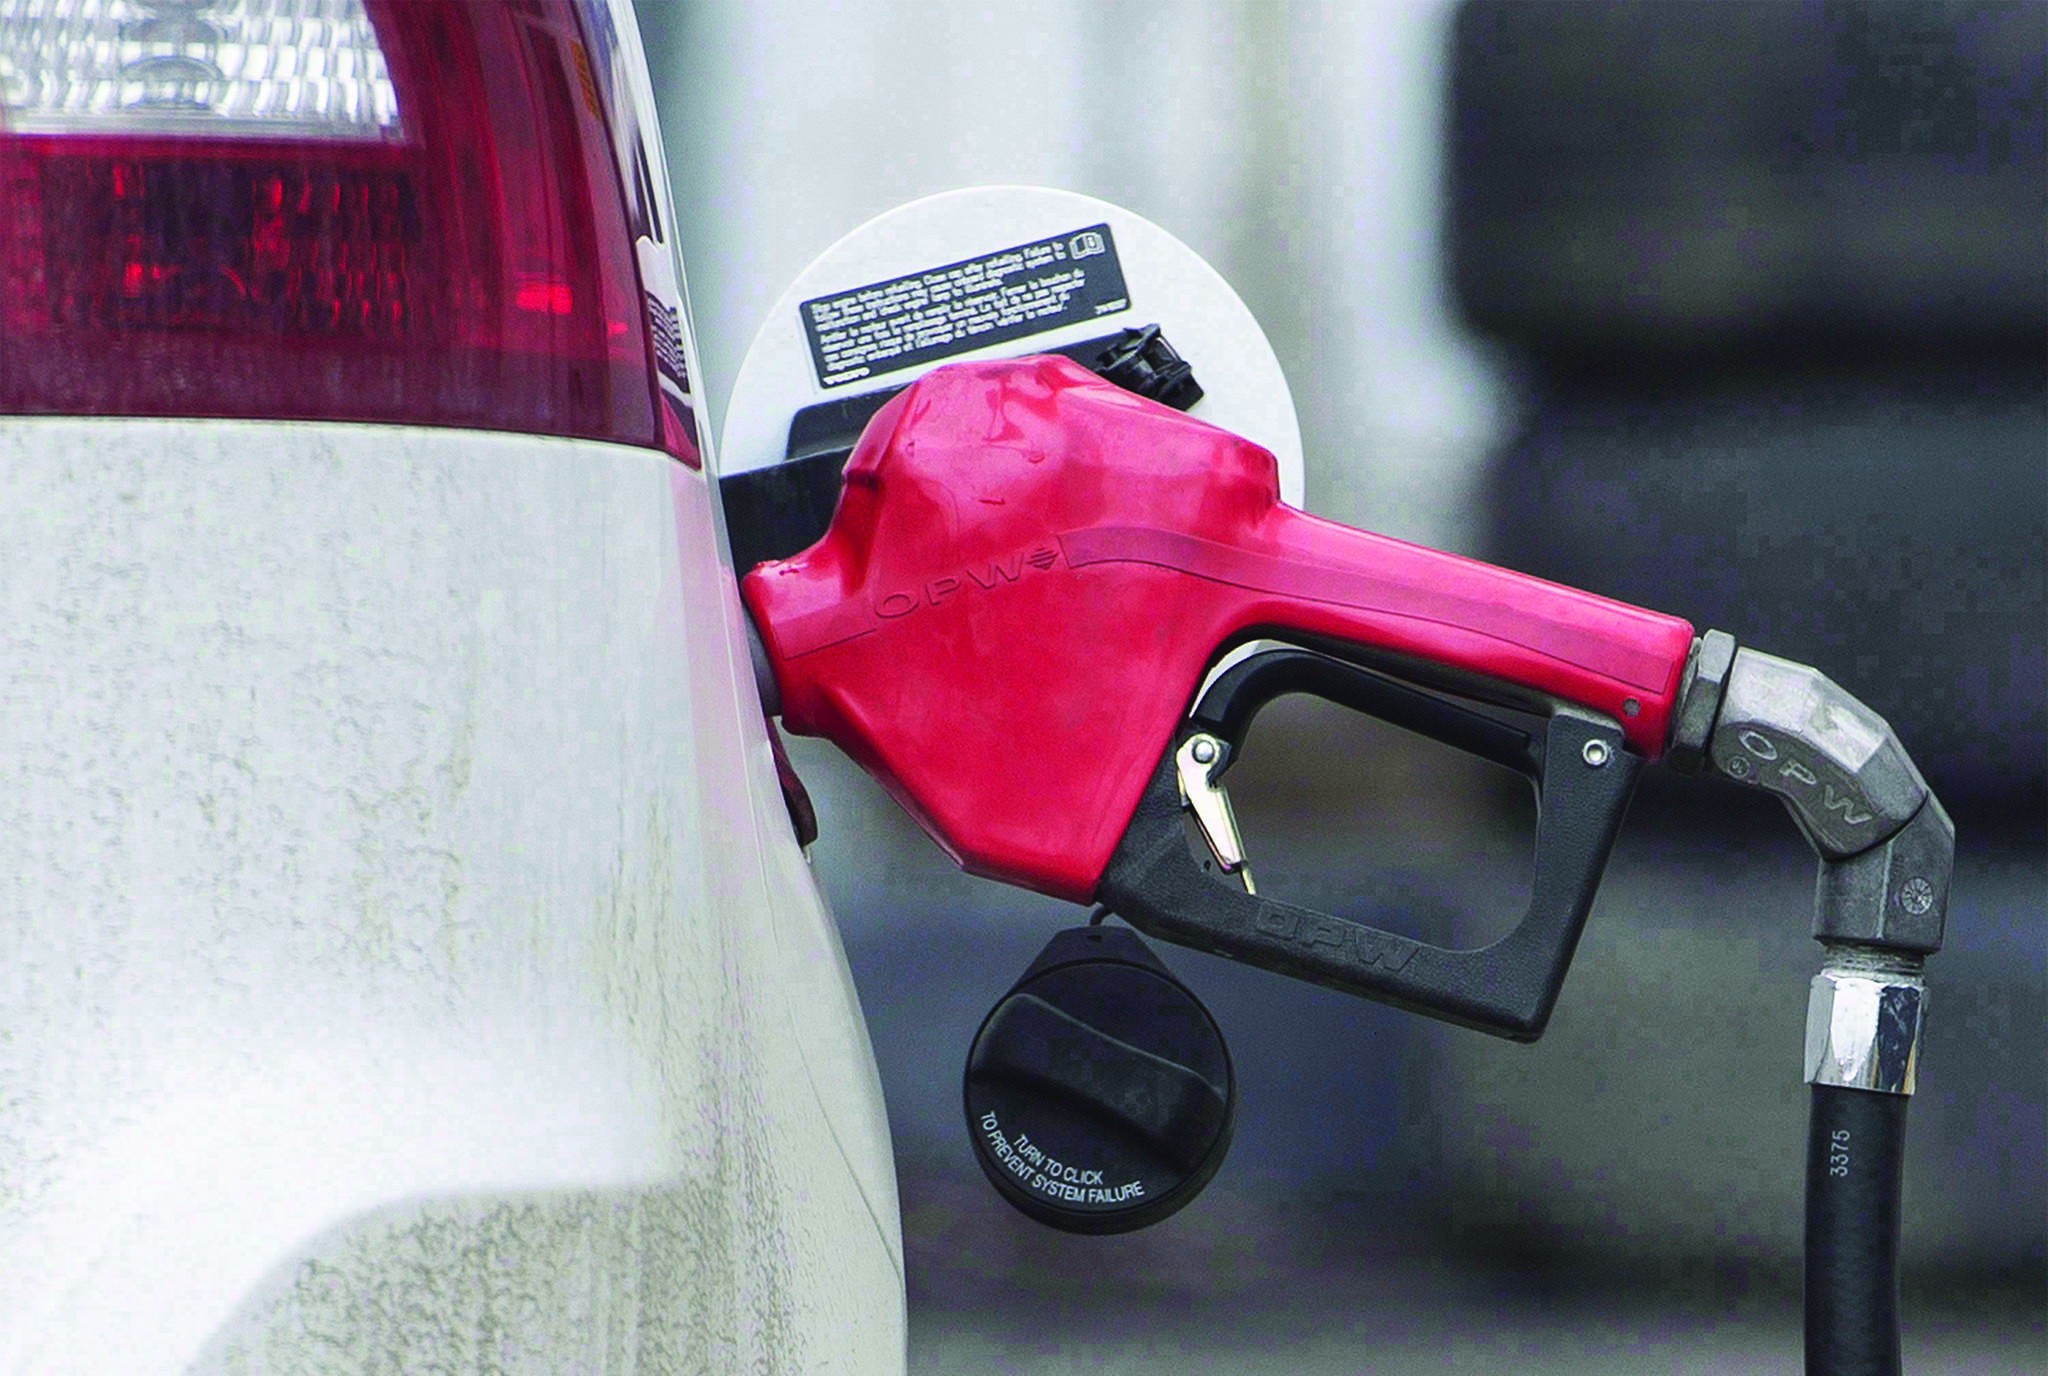 Oil war and Covid-19 lead to lower prices at the gas pump